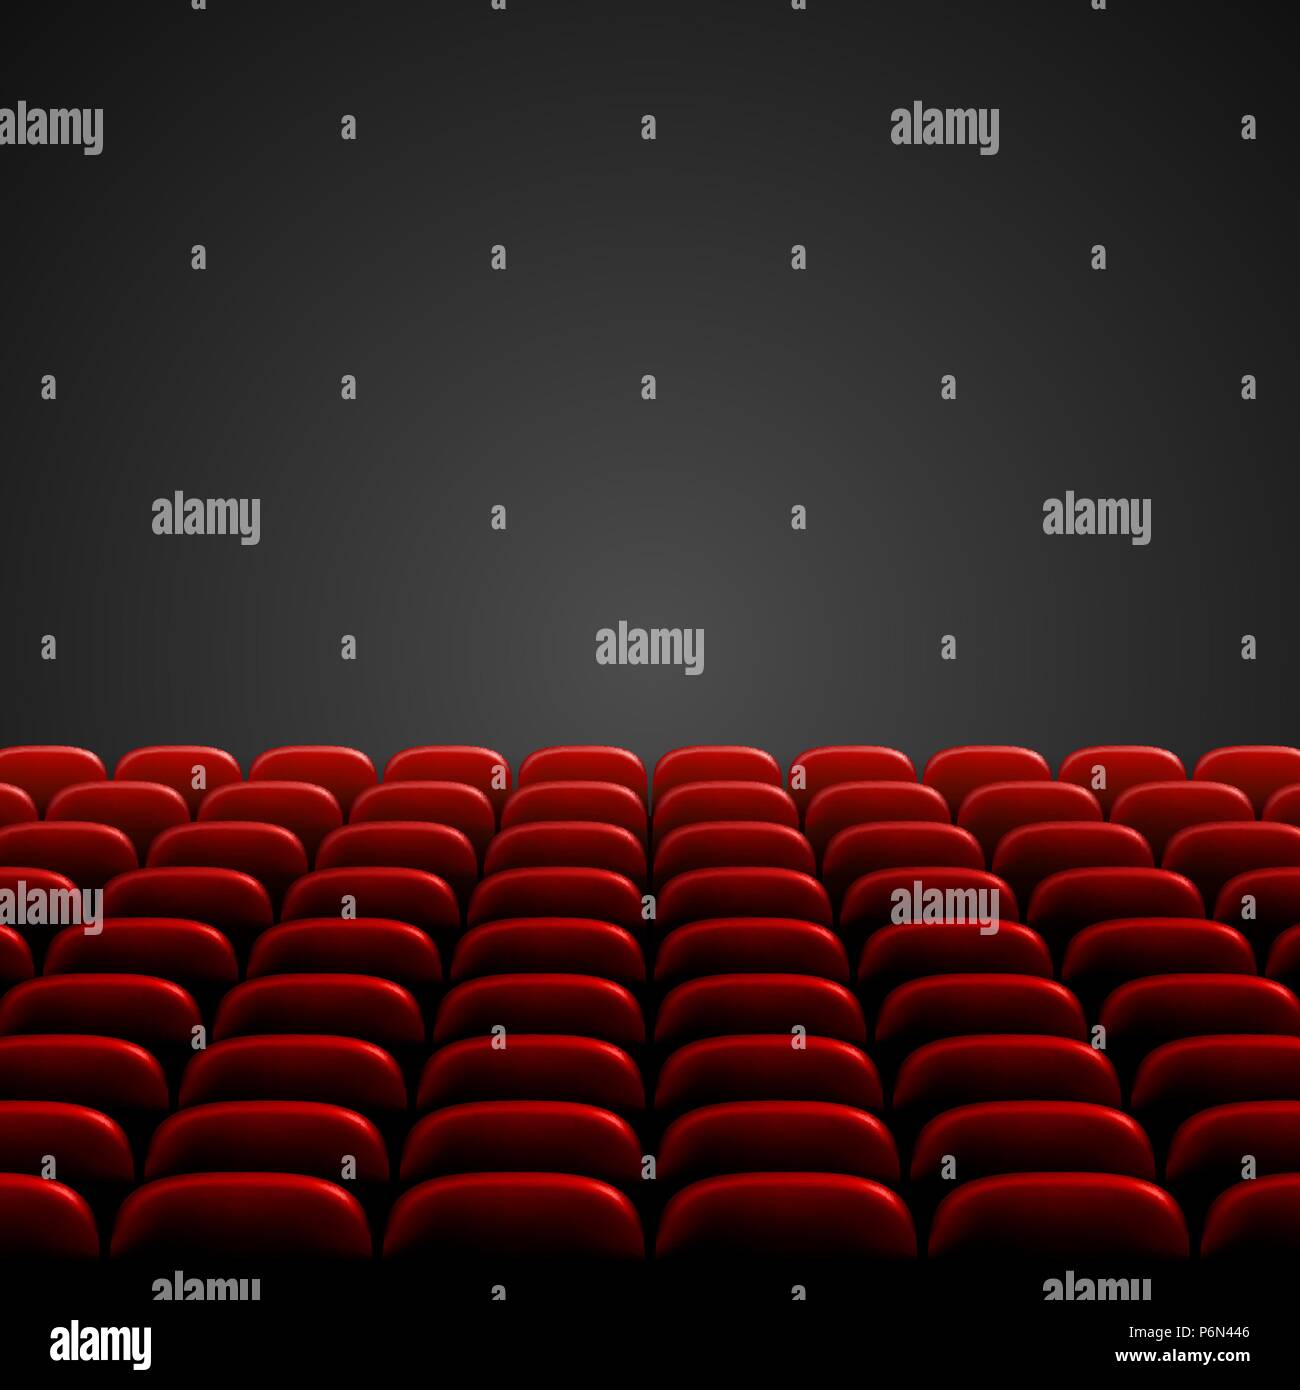 Rows of red cinema or theater seats in front of black blank screen. Wide empty movie theater auditorium with red seats. Vector illustration Stock Vector